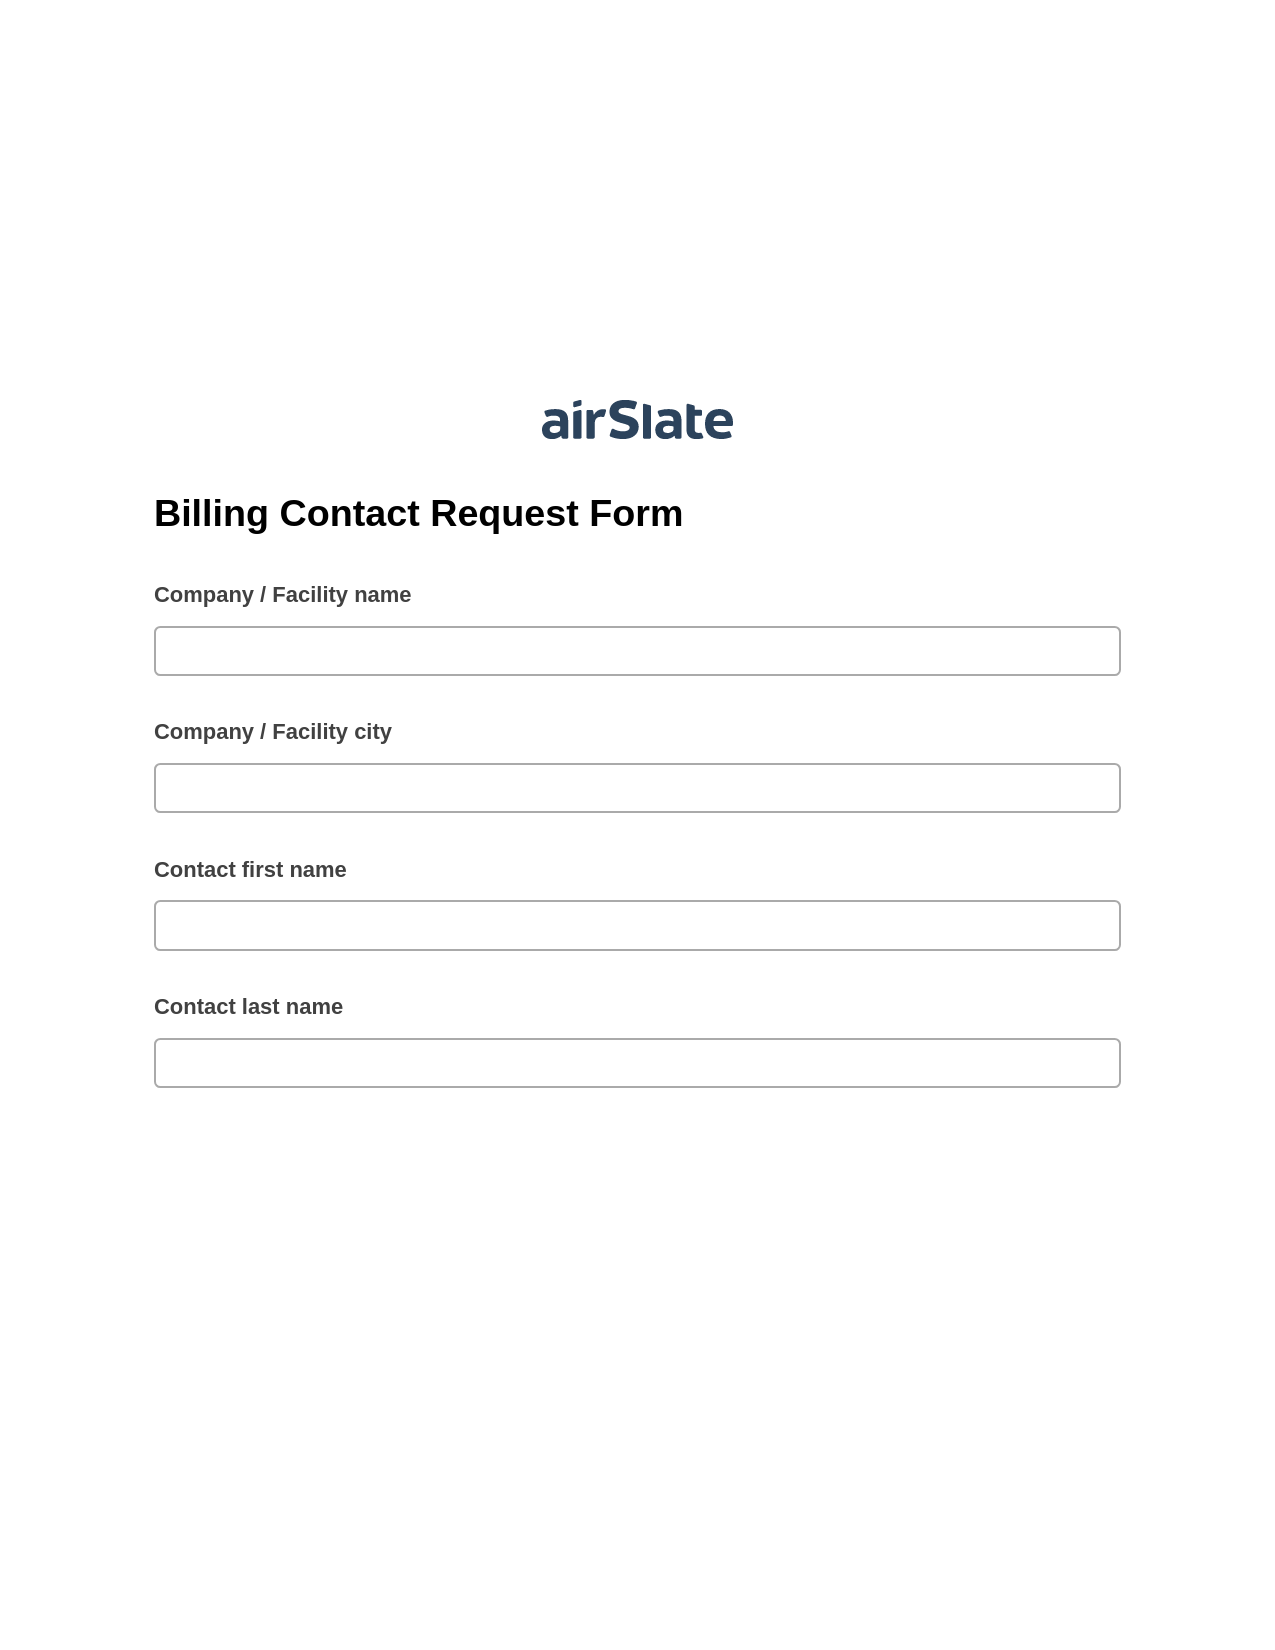 Multirole Billing Contact Request Form System Bot - Slack Two-Way Binding Bot, Add Tags to Slate Bot, Export to Excel 365 Bot